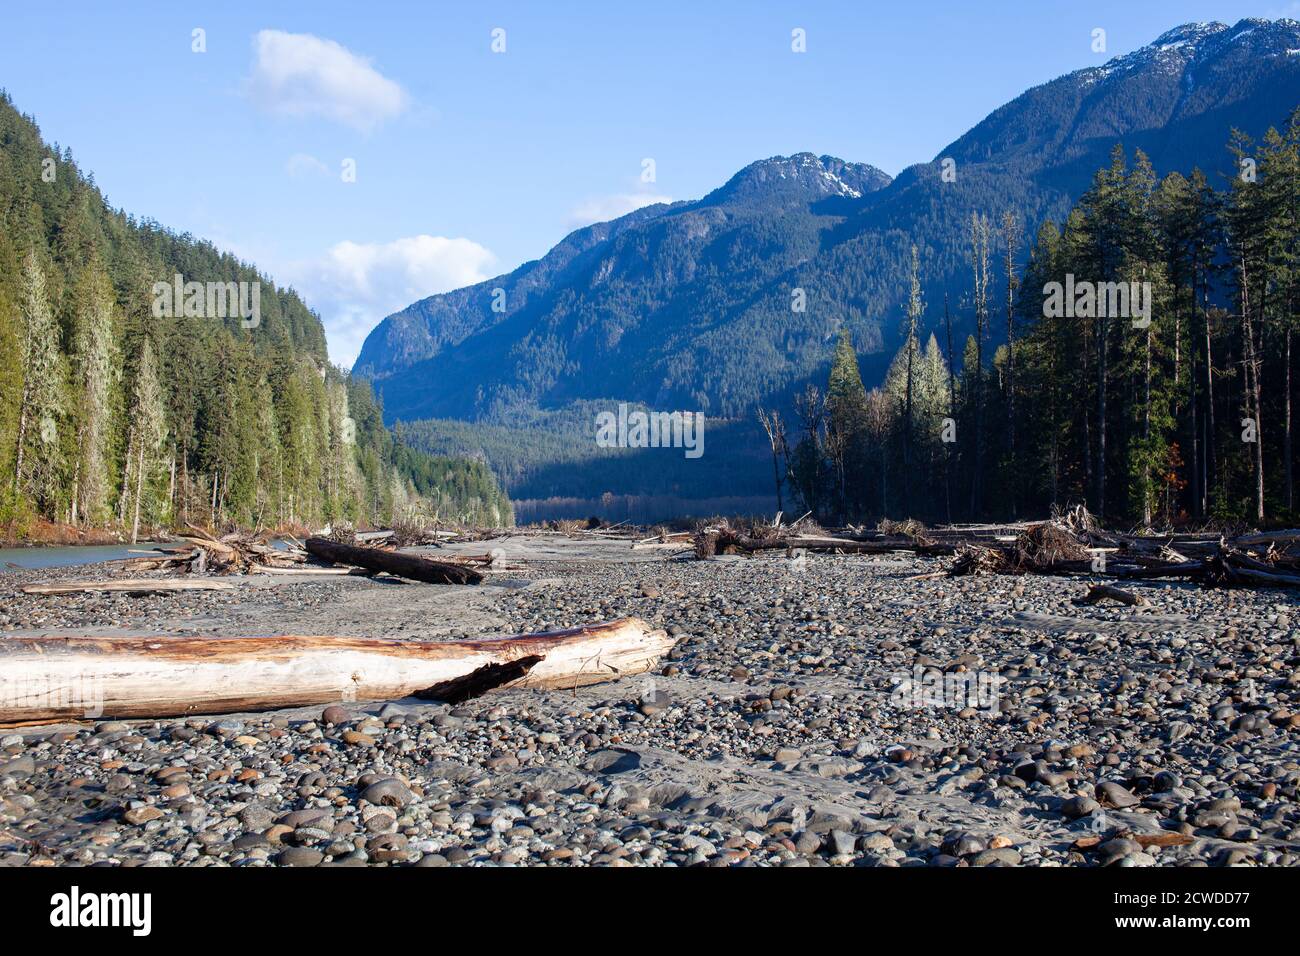 A river bed in the Squamish valley in British-Columbia, Canada